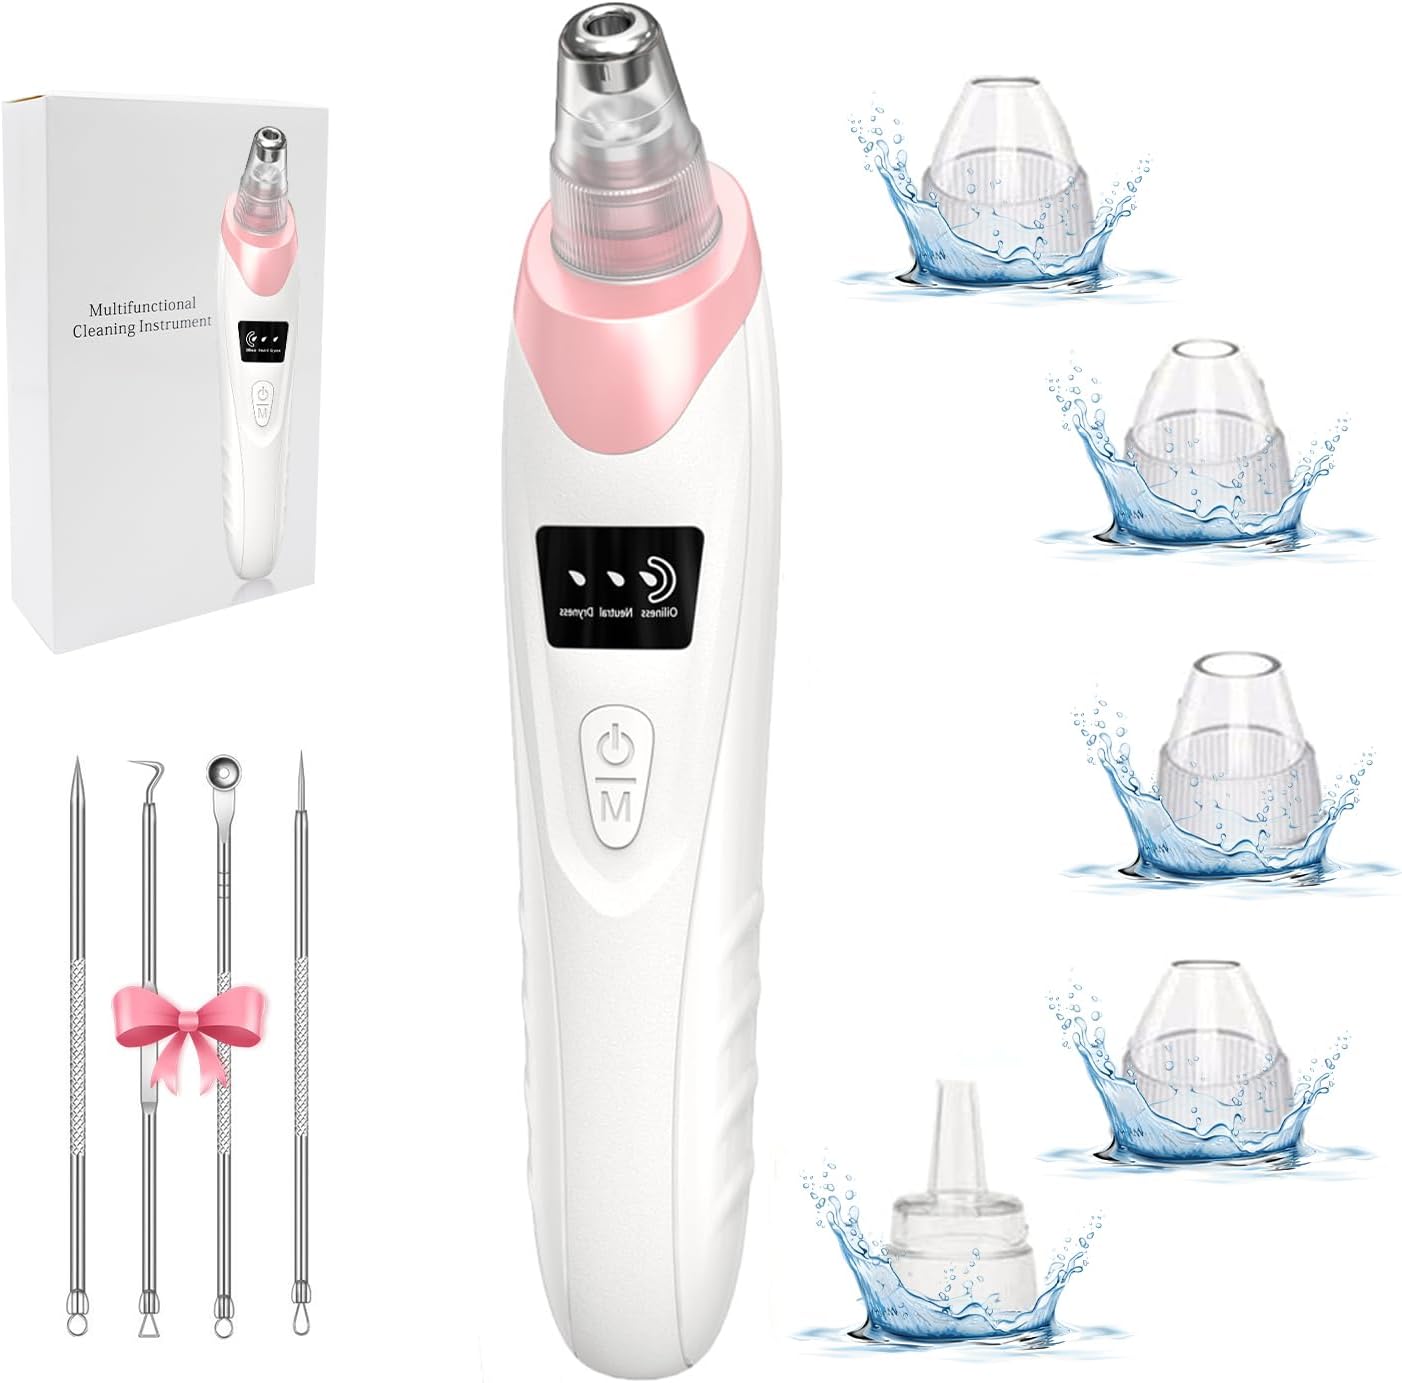 Newest USB Rechargeable Electric Acne Extractor Tool for Adults, Blackhead Remover Pore Vacuum with 5 Suction Power Levels, 5 Probes.